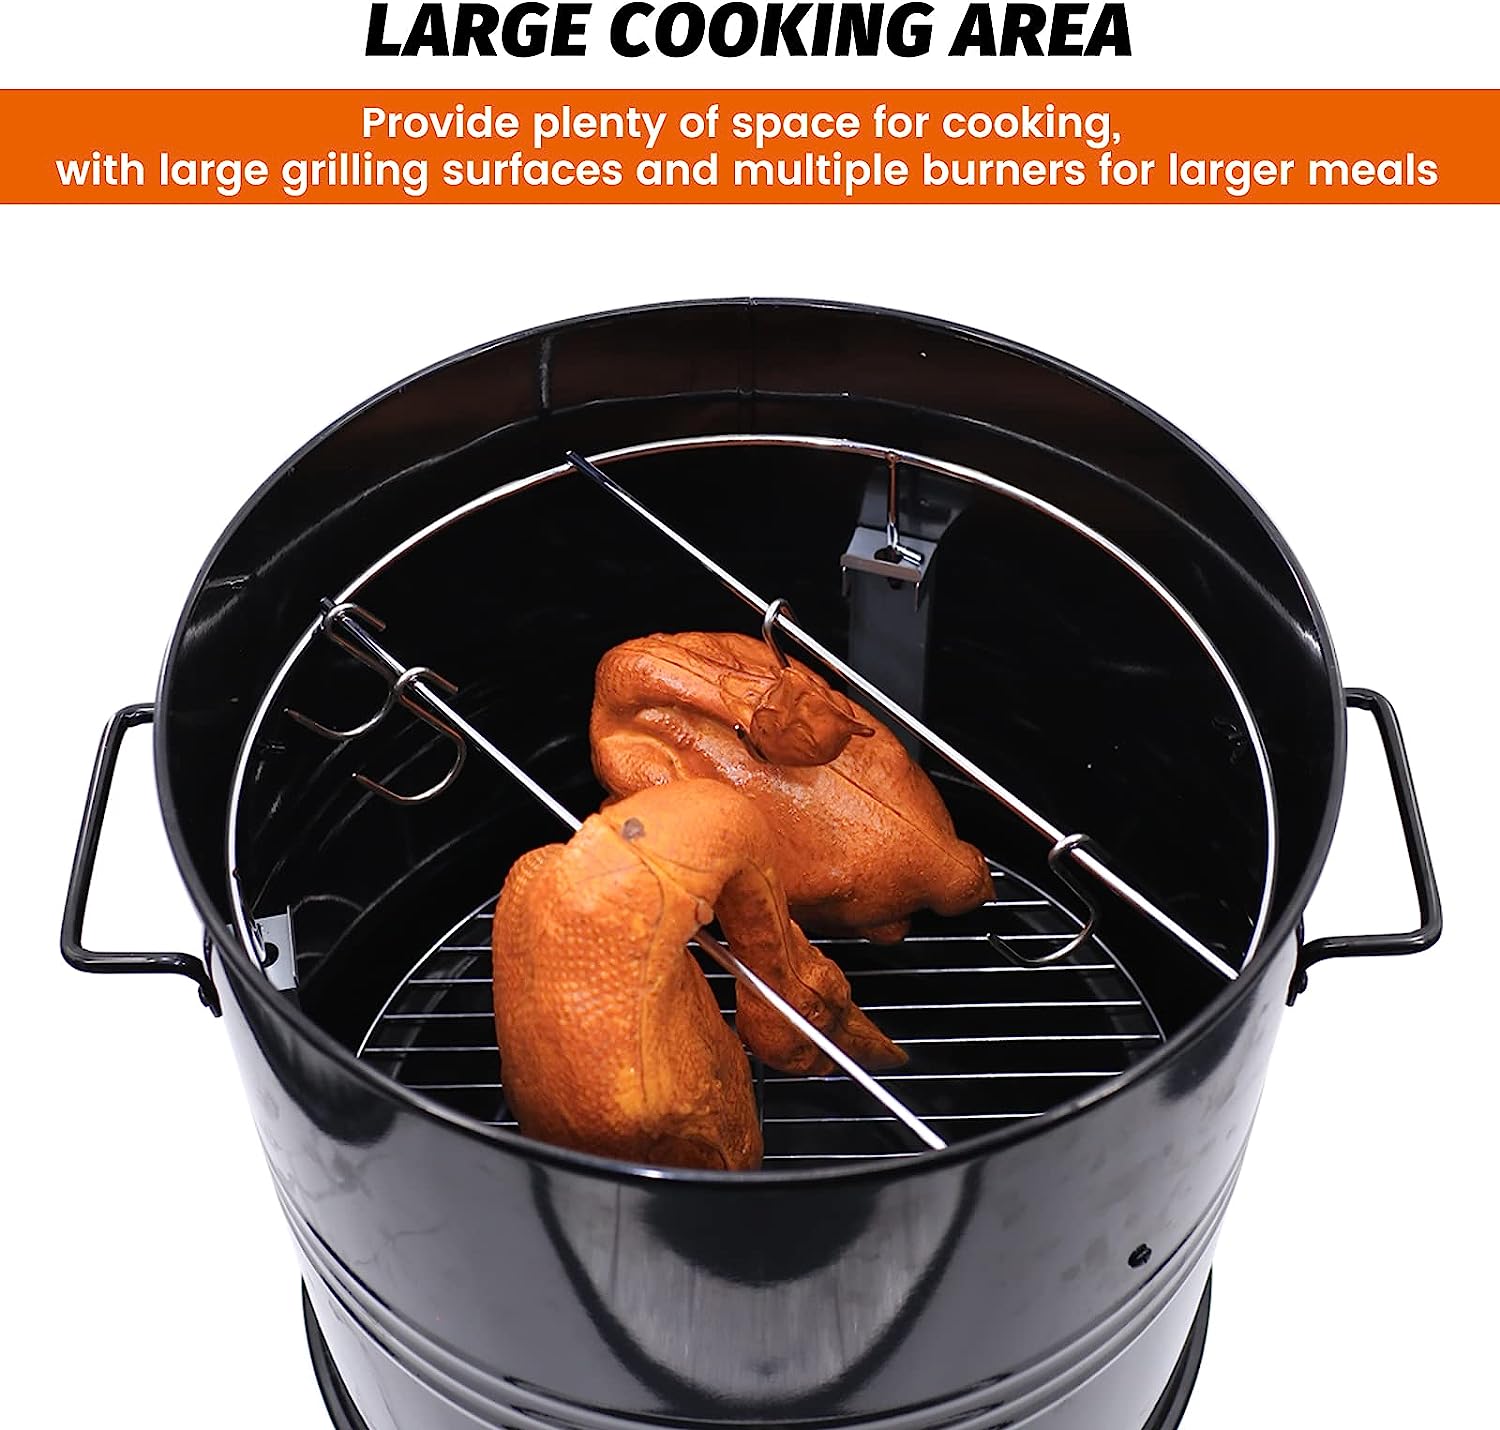 Hakka 18-Inch Multi-Function Barbecue and Charcoal Smoker Grill - image 3 of 14